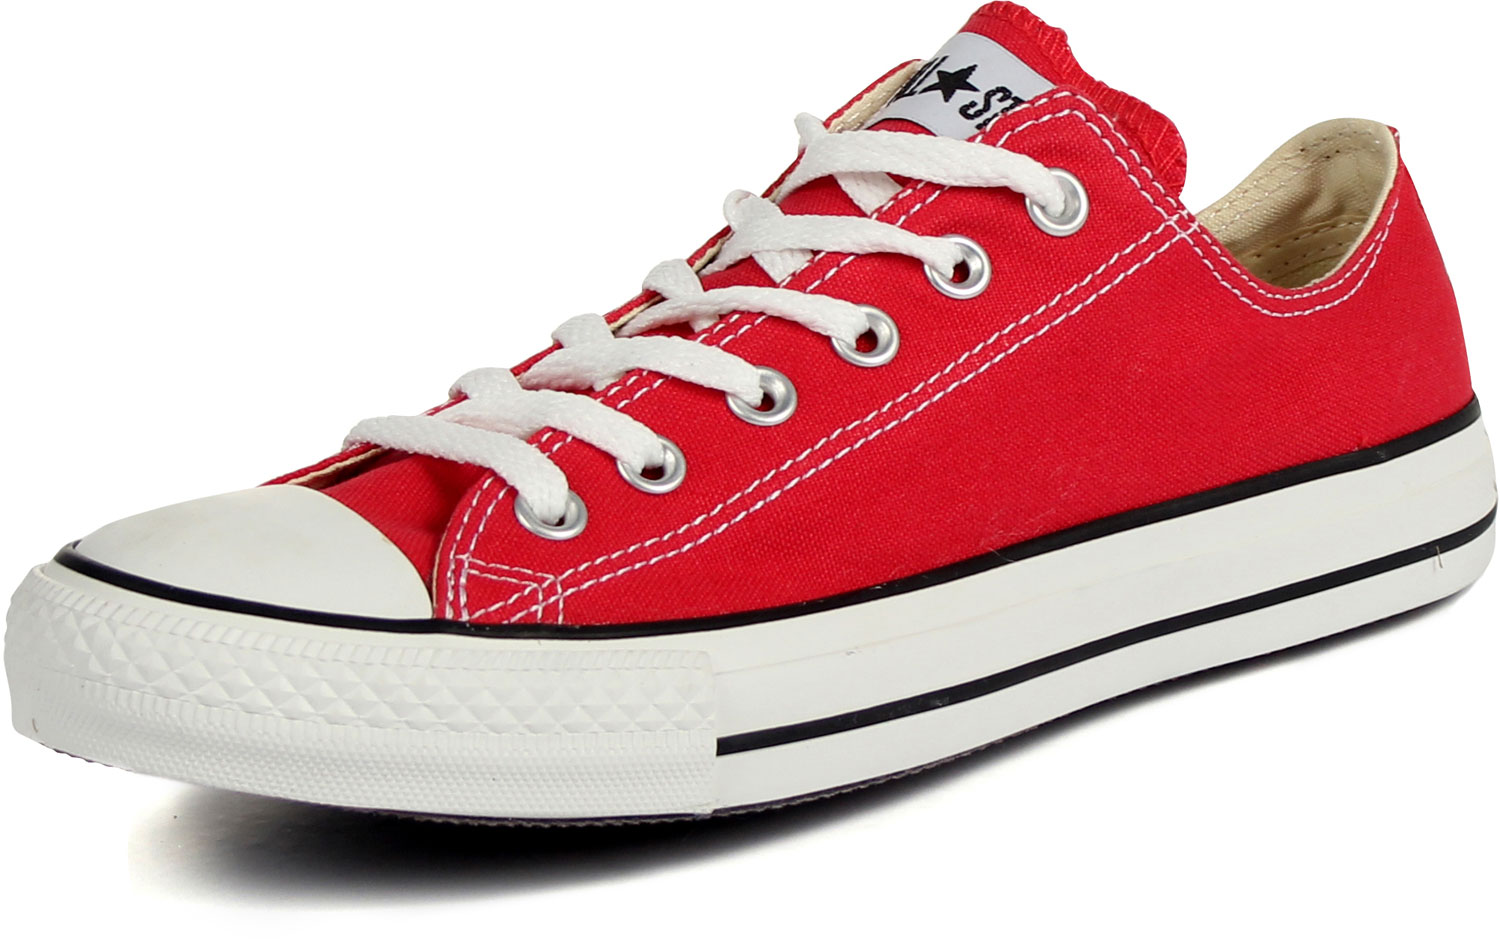 Converse Chuck Taylor All Star Shoes Low Top in Red